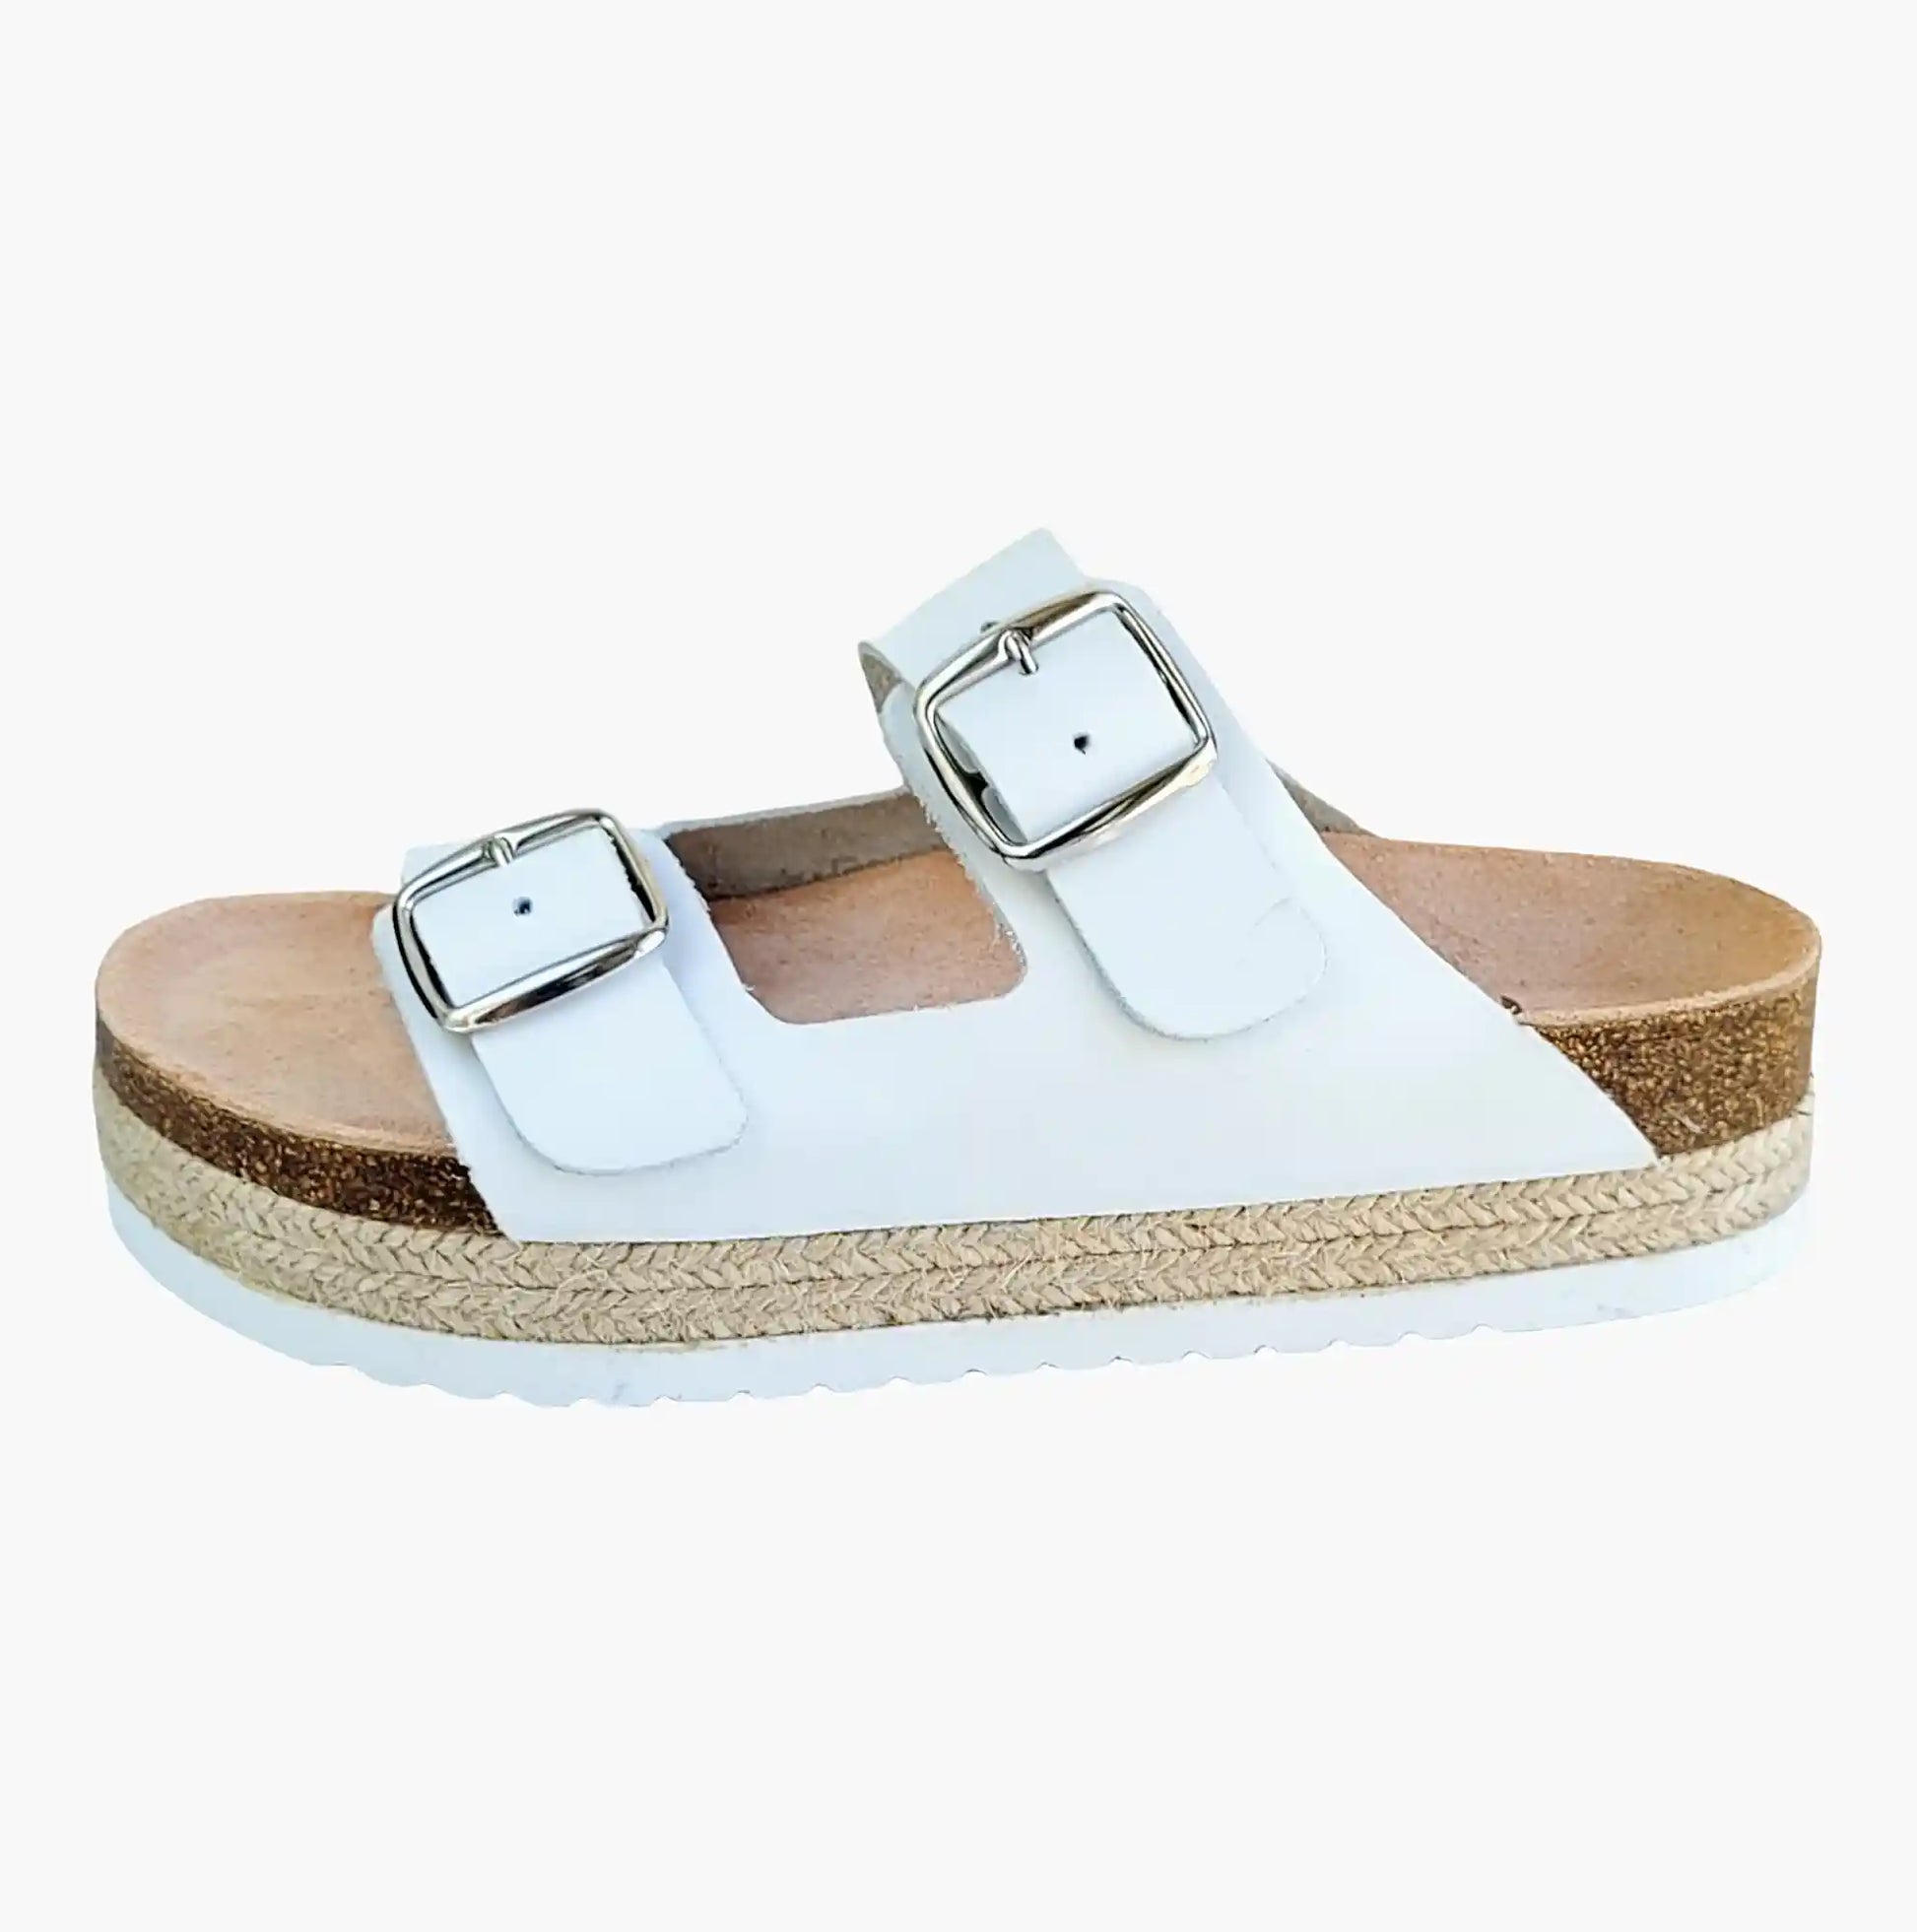 Sandals-White-leather-arch-support-double-buckle-sandals-side-view